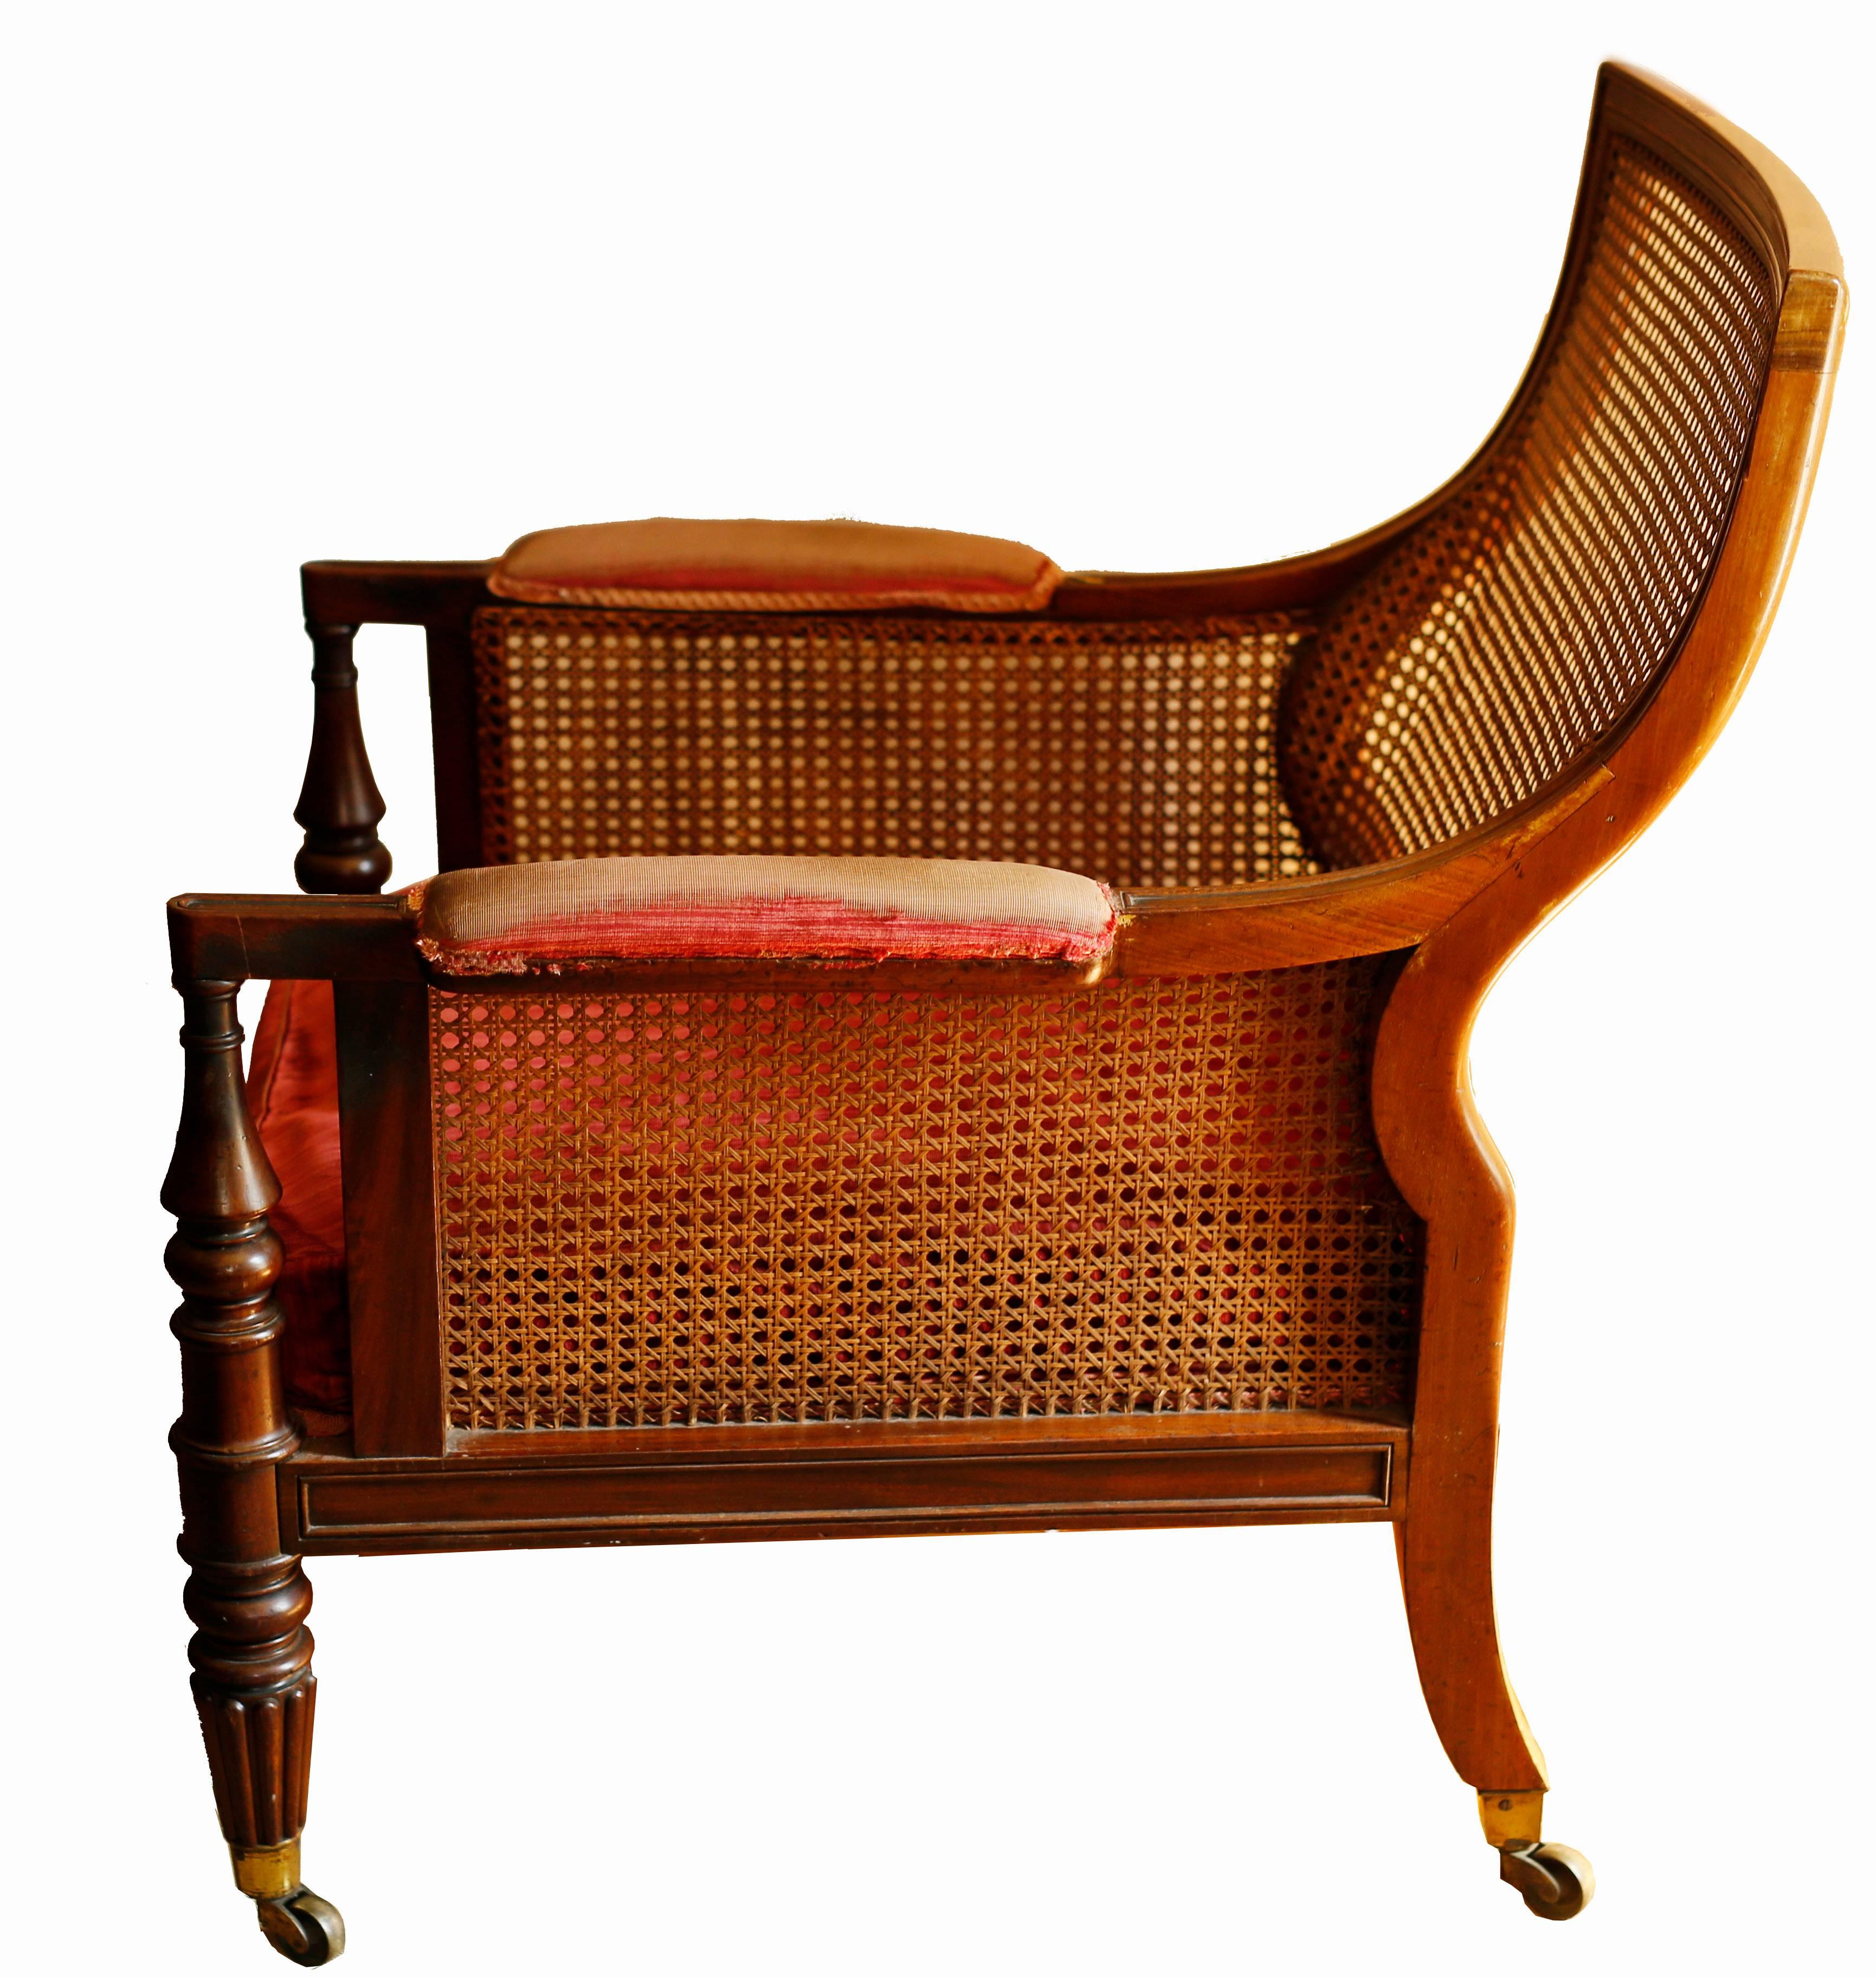 A handsome regency library bergere after the French antique manner, this mahogany chair features a Grecian-scrolled caned back and a generously proportioned seat.  This chair is nearly identical to a pair supplied to the Library at Mere Hall